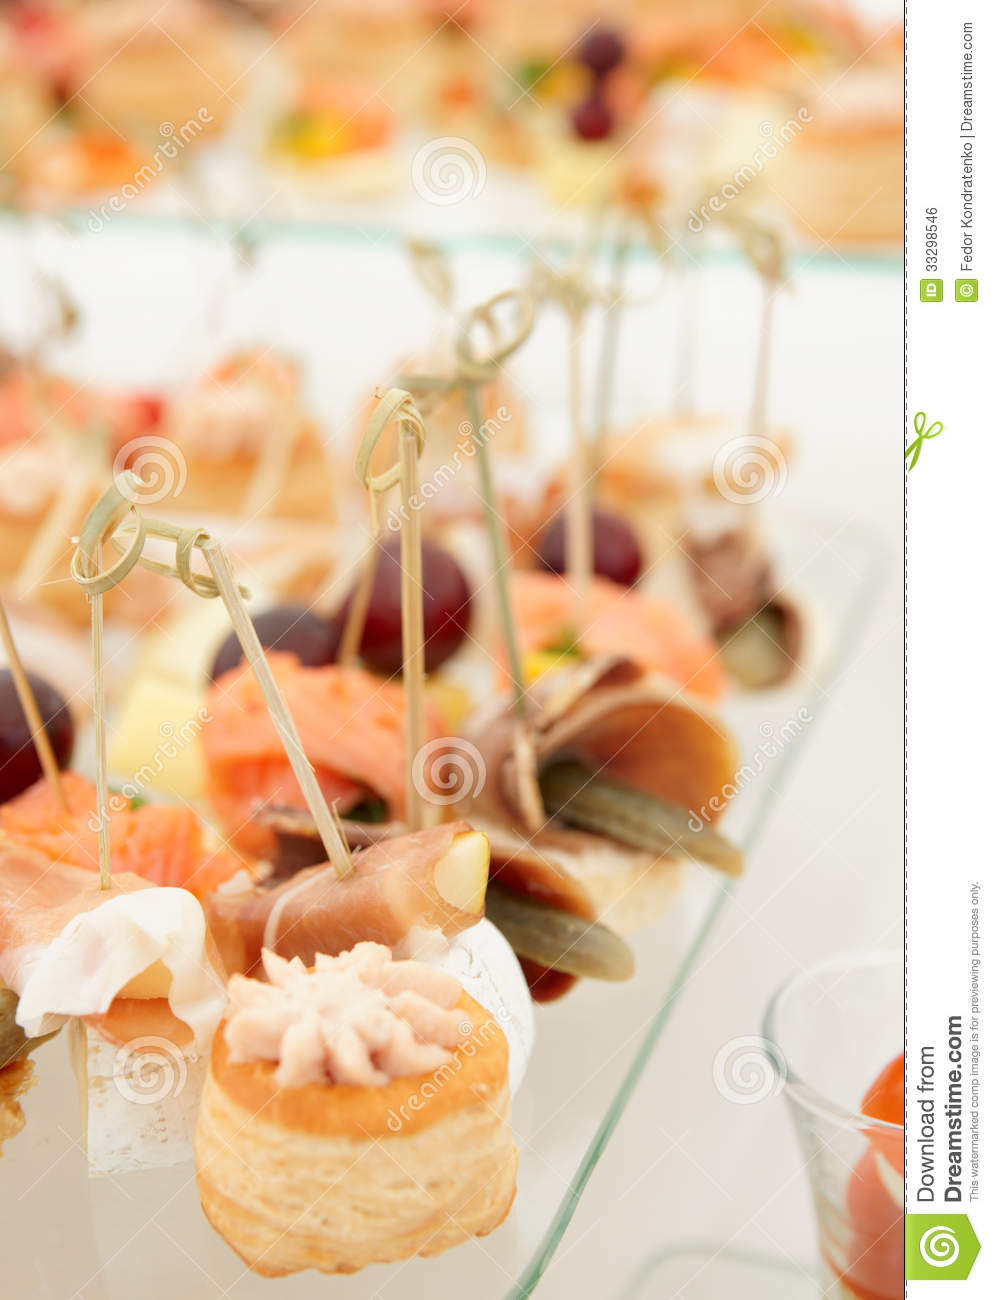 Various Meat Fish And Cheese Banquet Snacks Catering Event